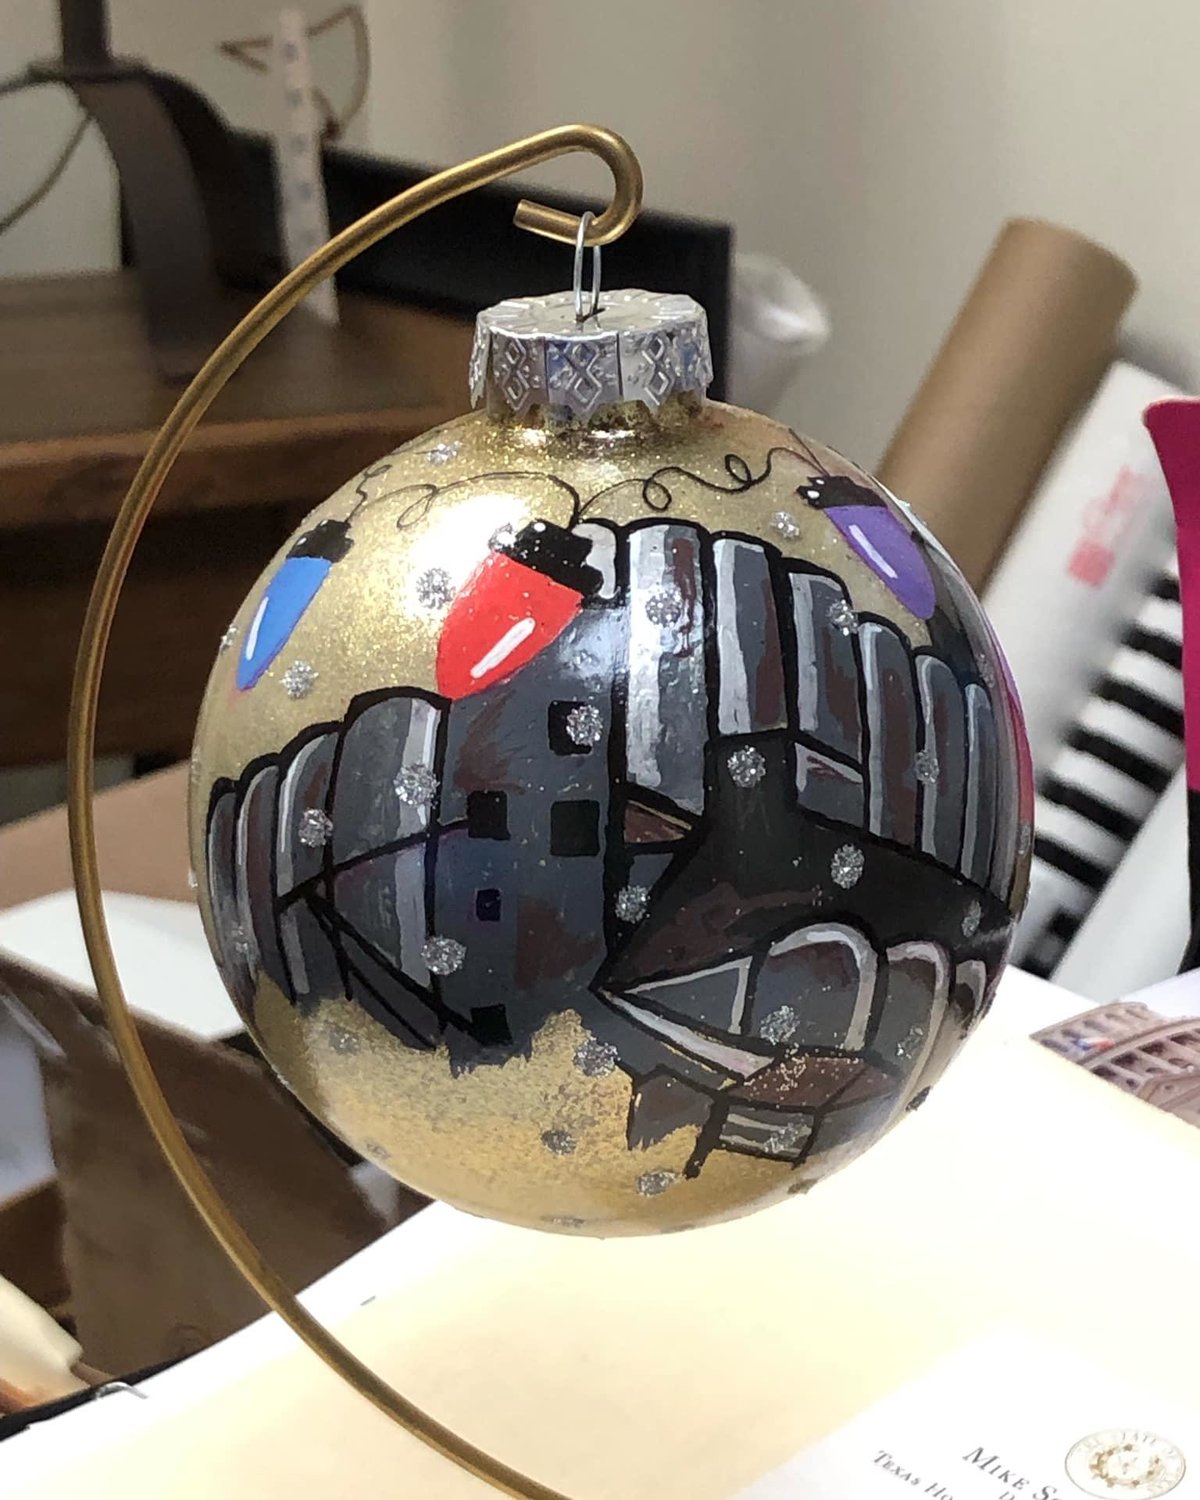 The ornament features an image of a Katy rice dryer.